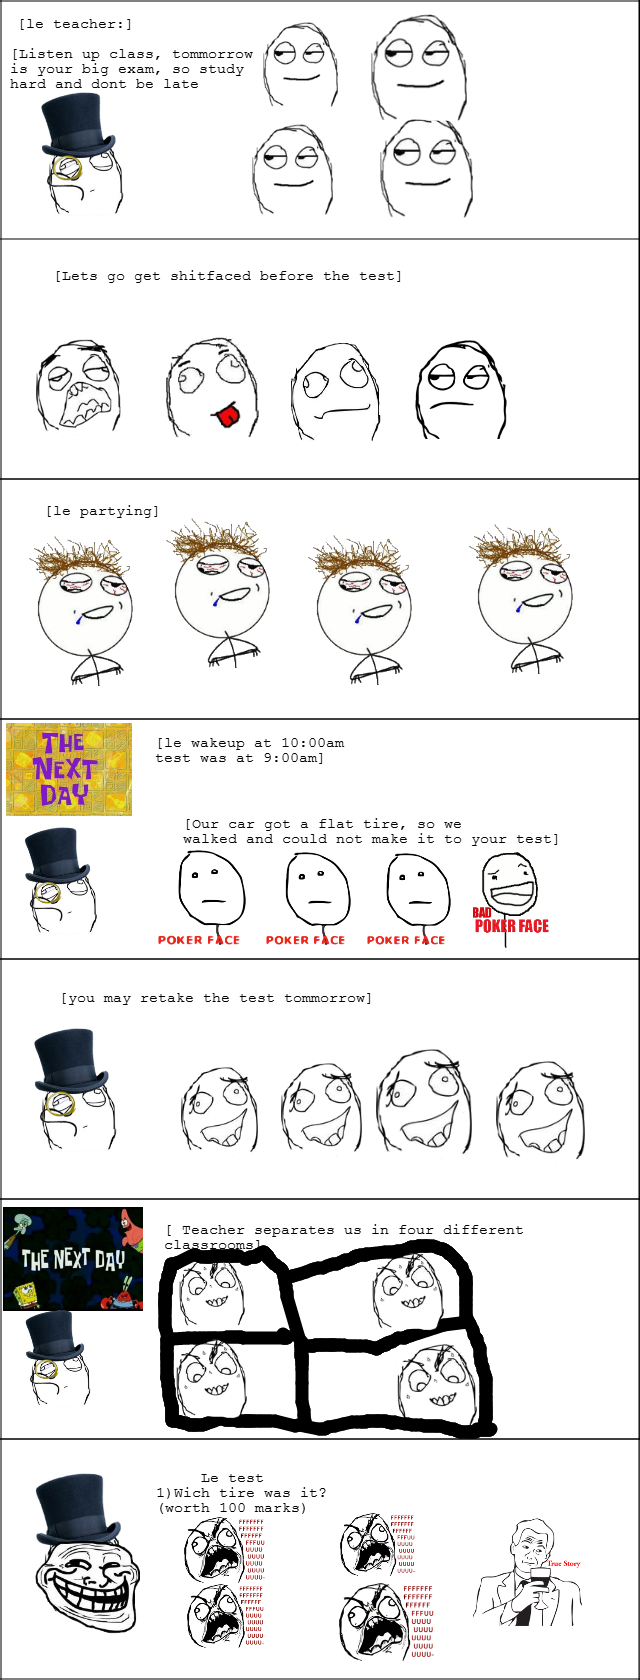 troll teacher. Happened to my teacher. teacher:] Listen up class, tomorrow (if) E) 'itifoi) is your big exam, so study hard and dont be late Lets go get shitfac